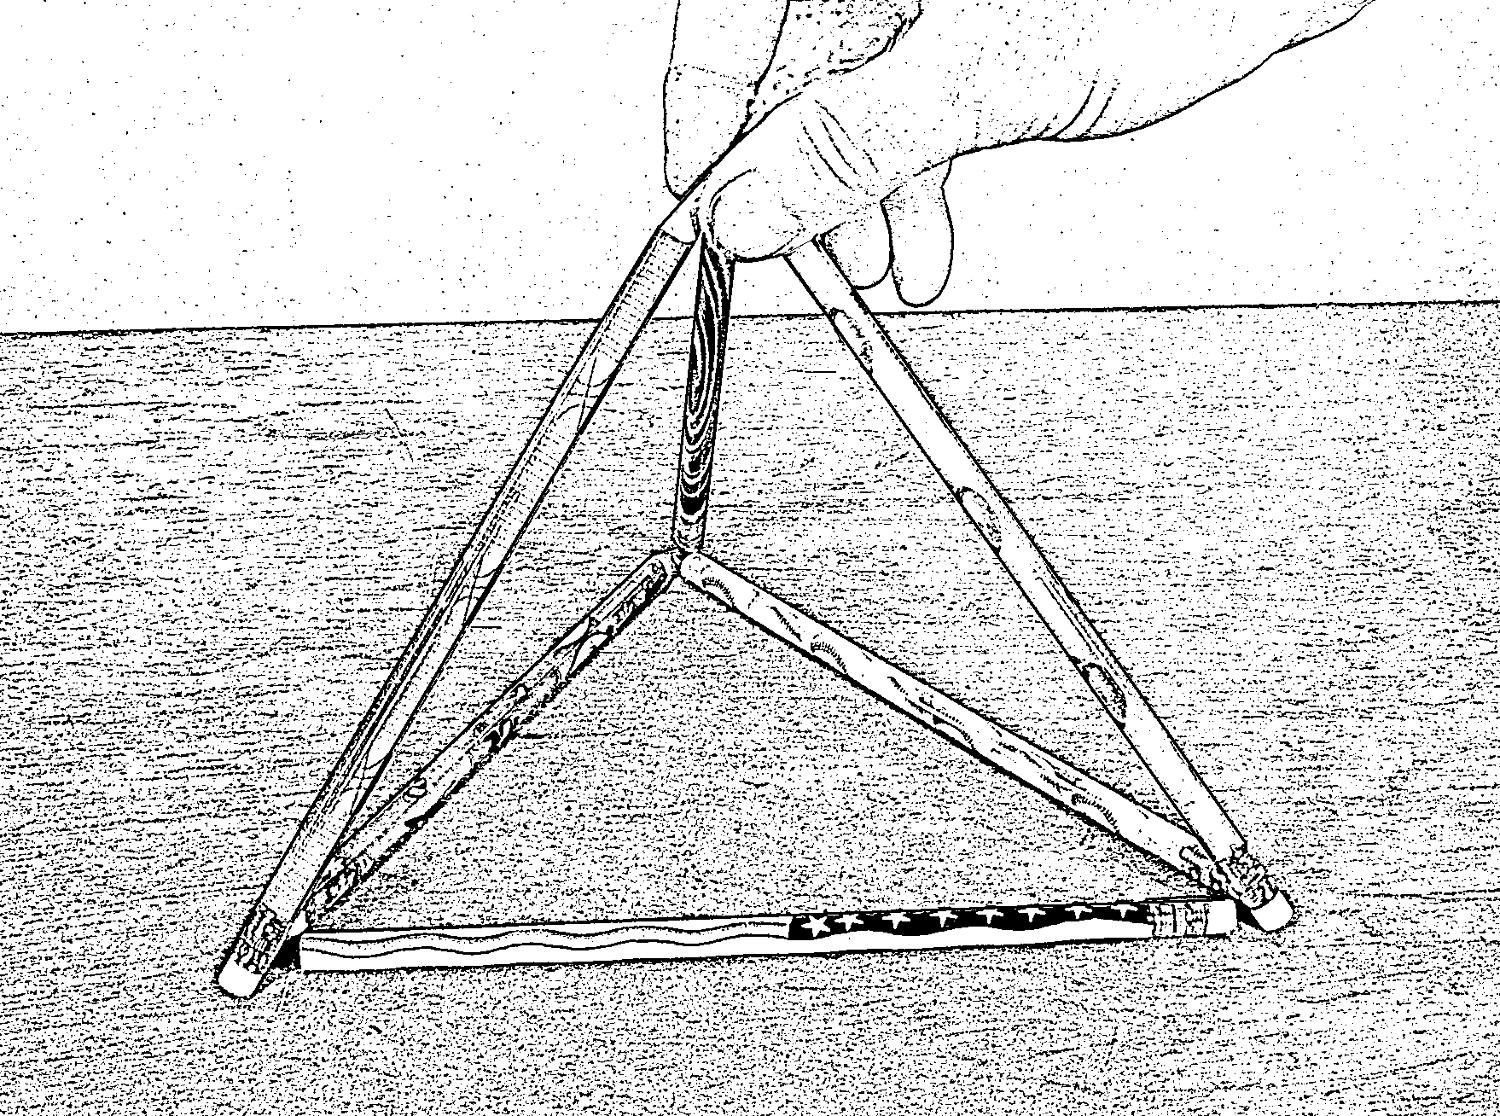 Six matchstick (actually, pencils are a lot easier to hold) can be arranged three-dimensionally to create four triangles.